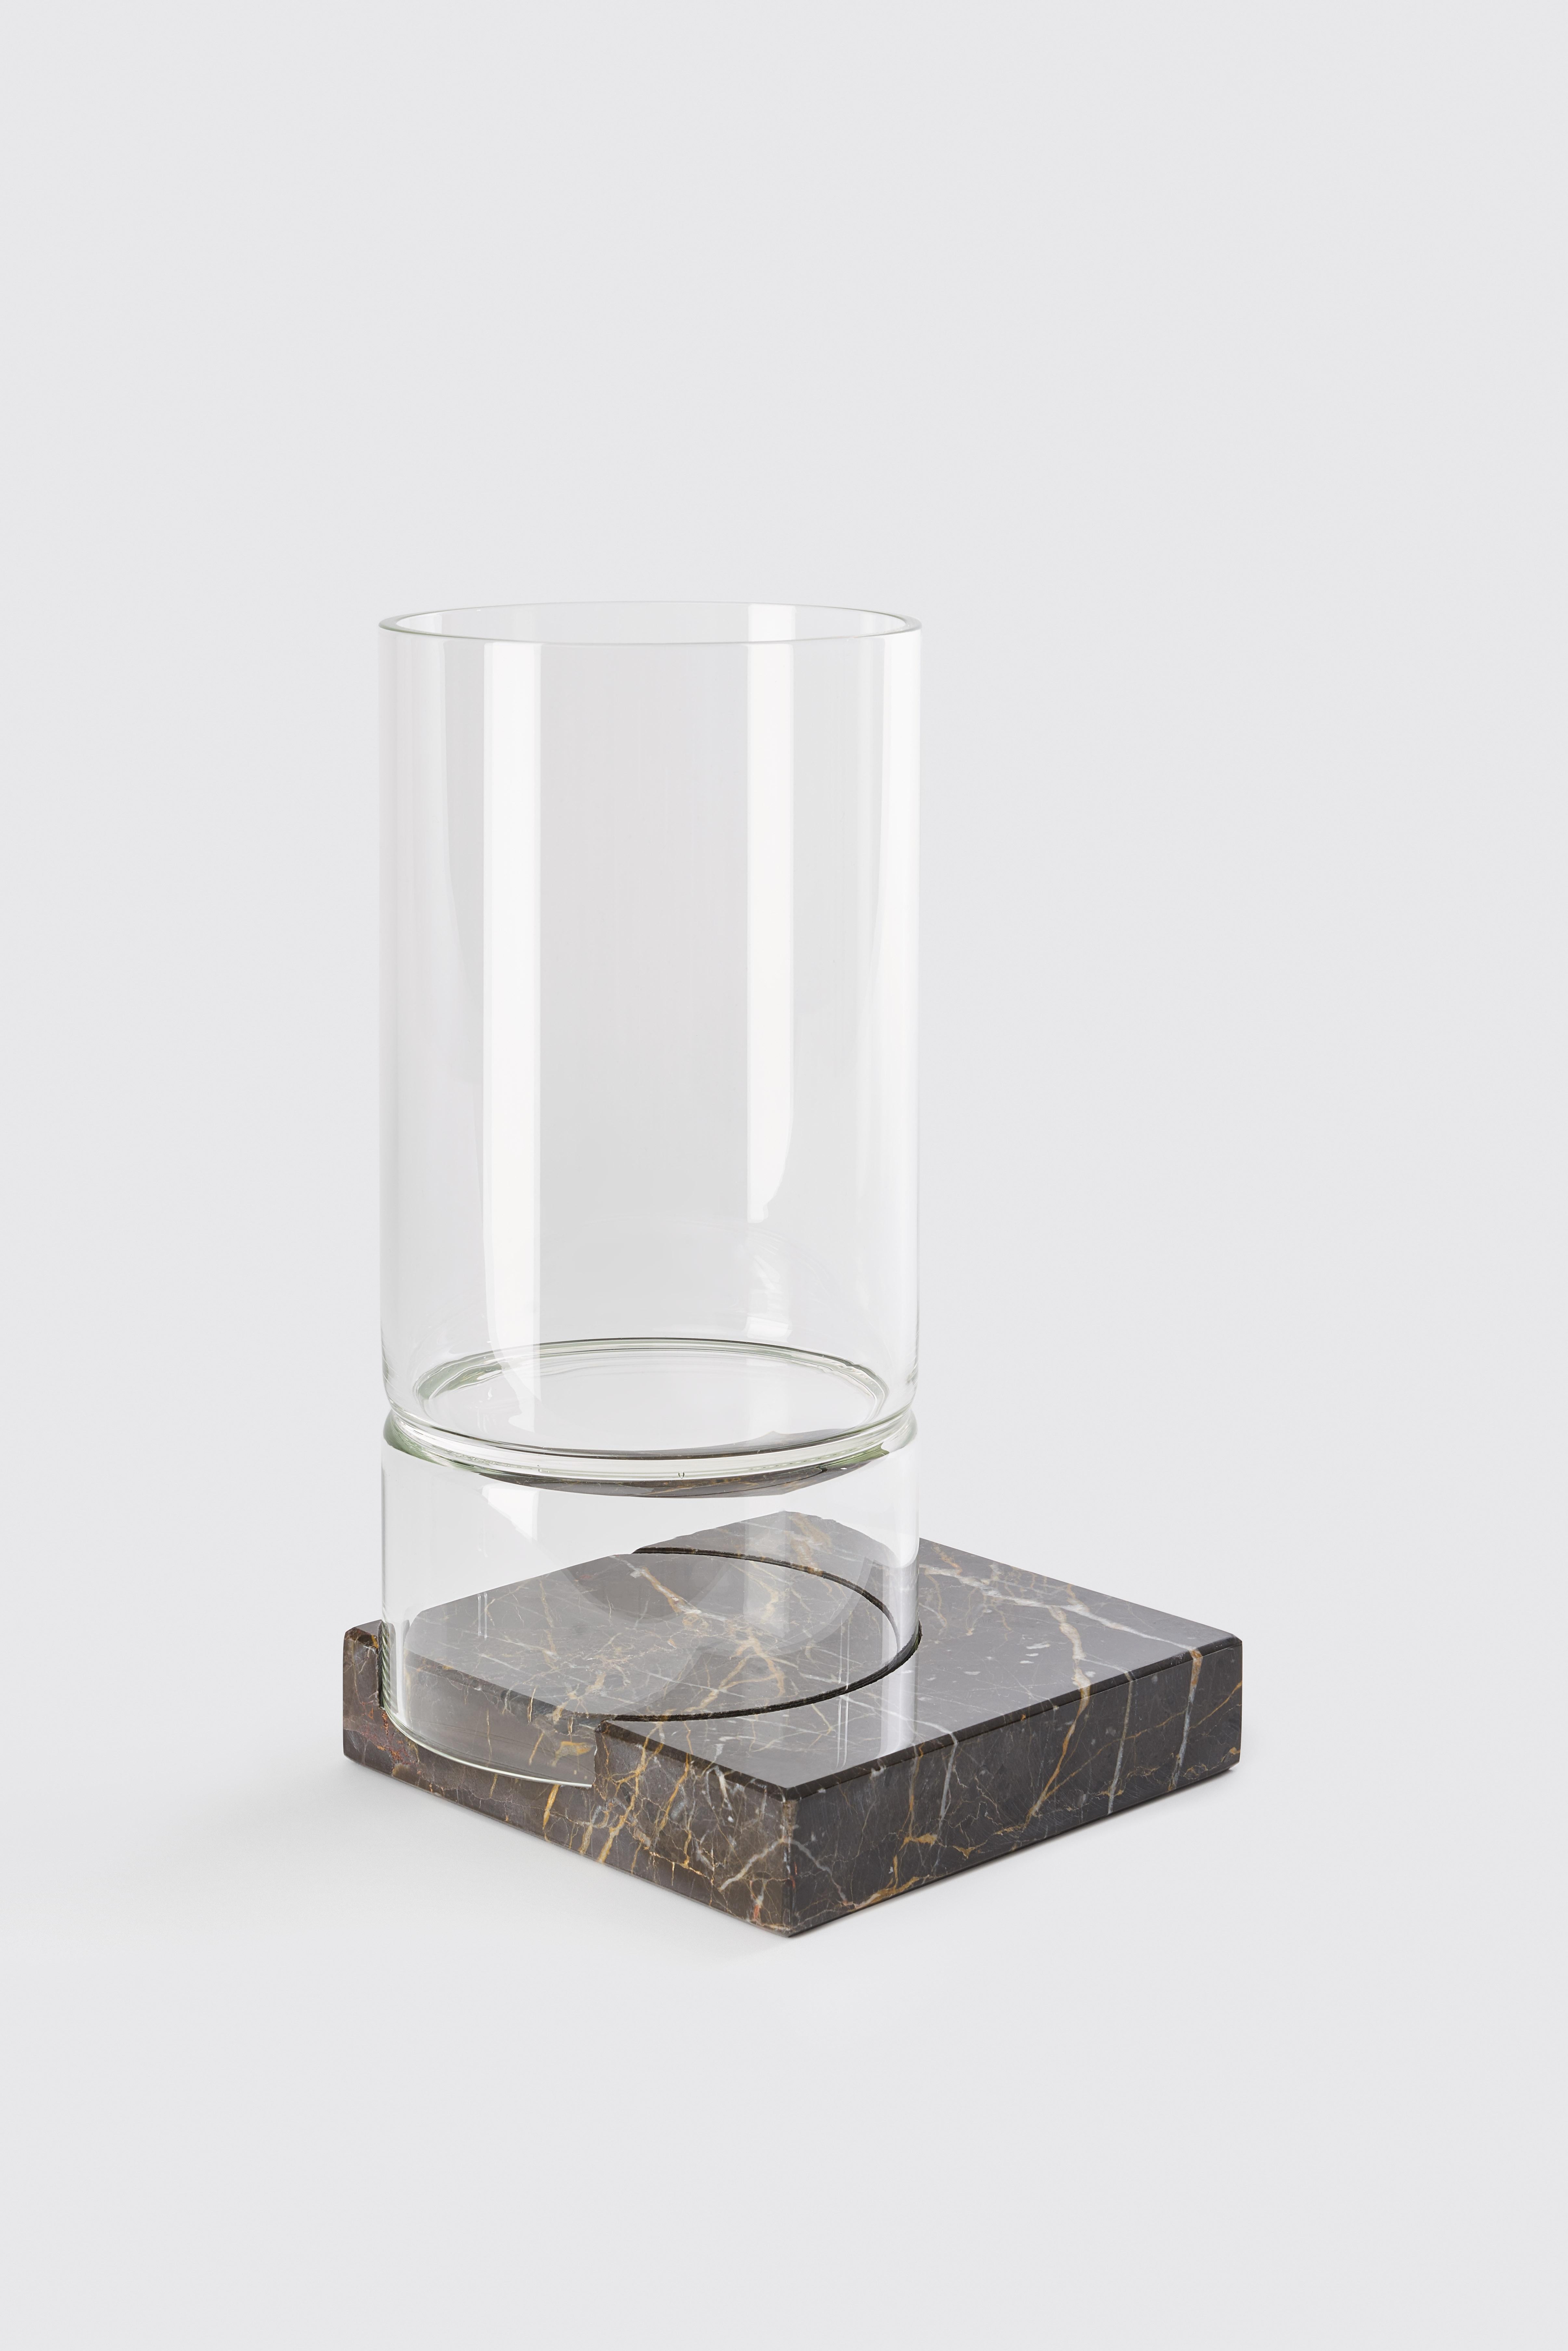 Segno vase II - Giorgio Bonaguro
Dimensions: D 18 x W 18 x H 15 cm.
Materials: emperador dark marble, glass.

A collection that was born from the desire to recover marble processing waste: small portions of slabs with different thickness,